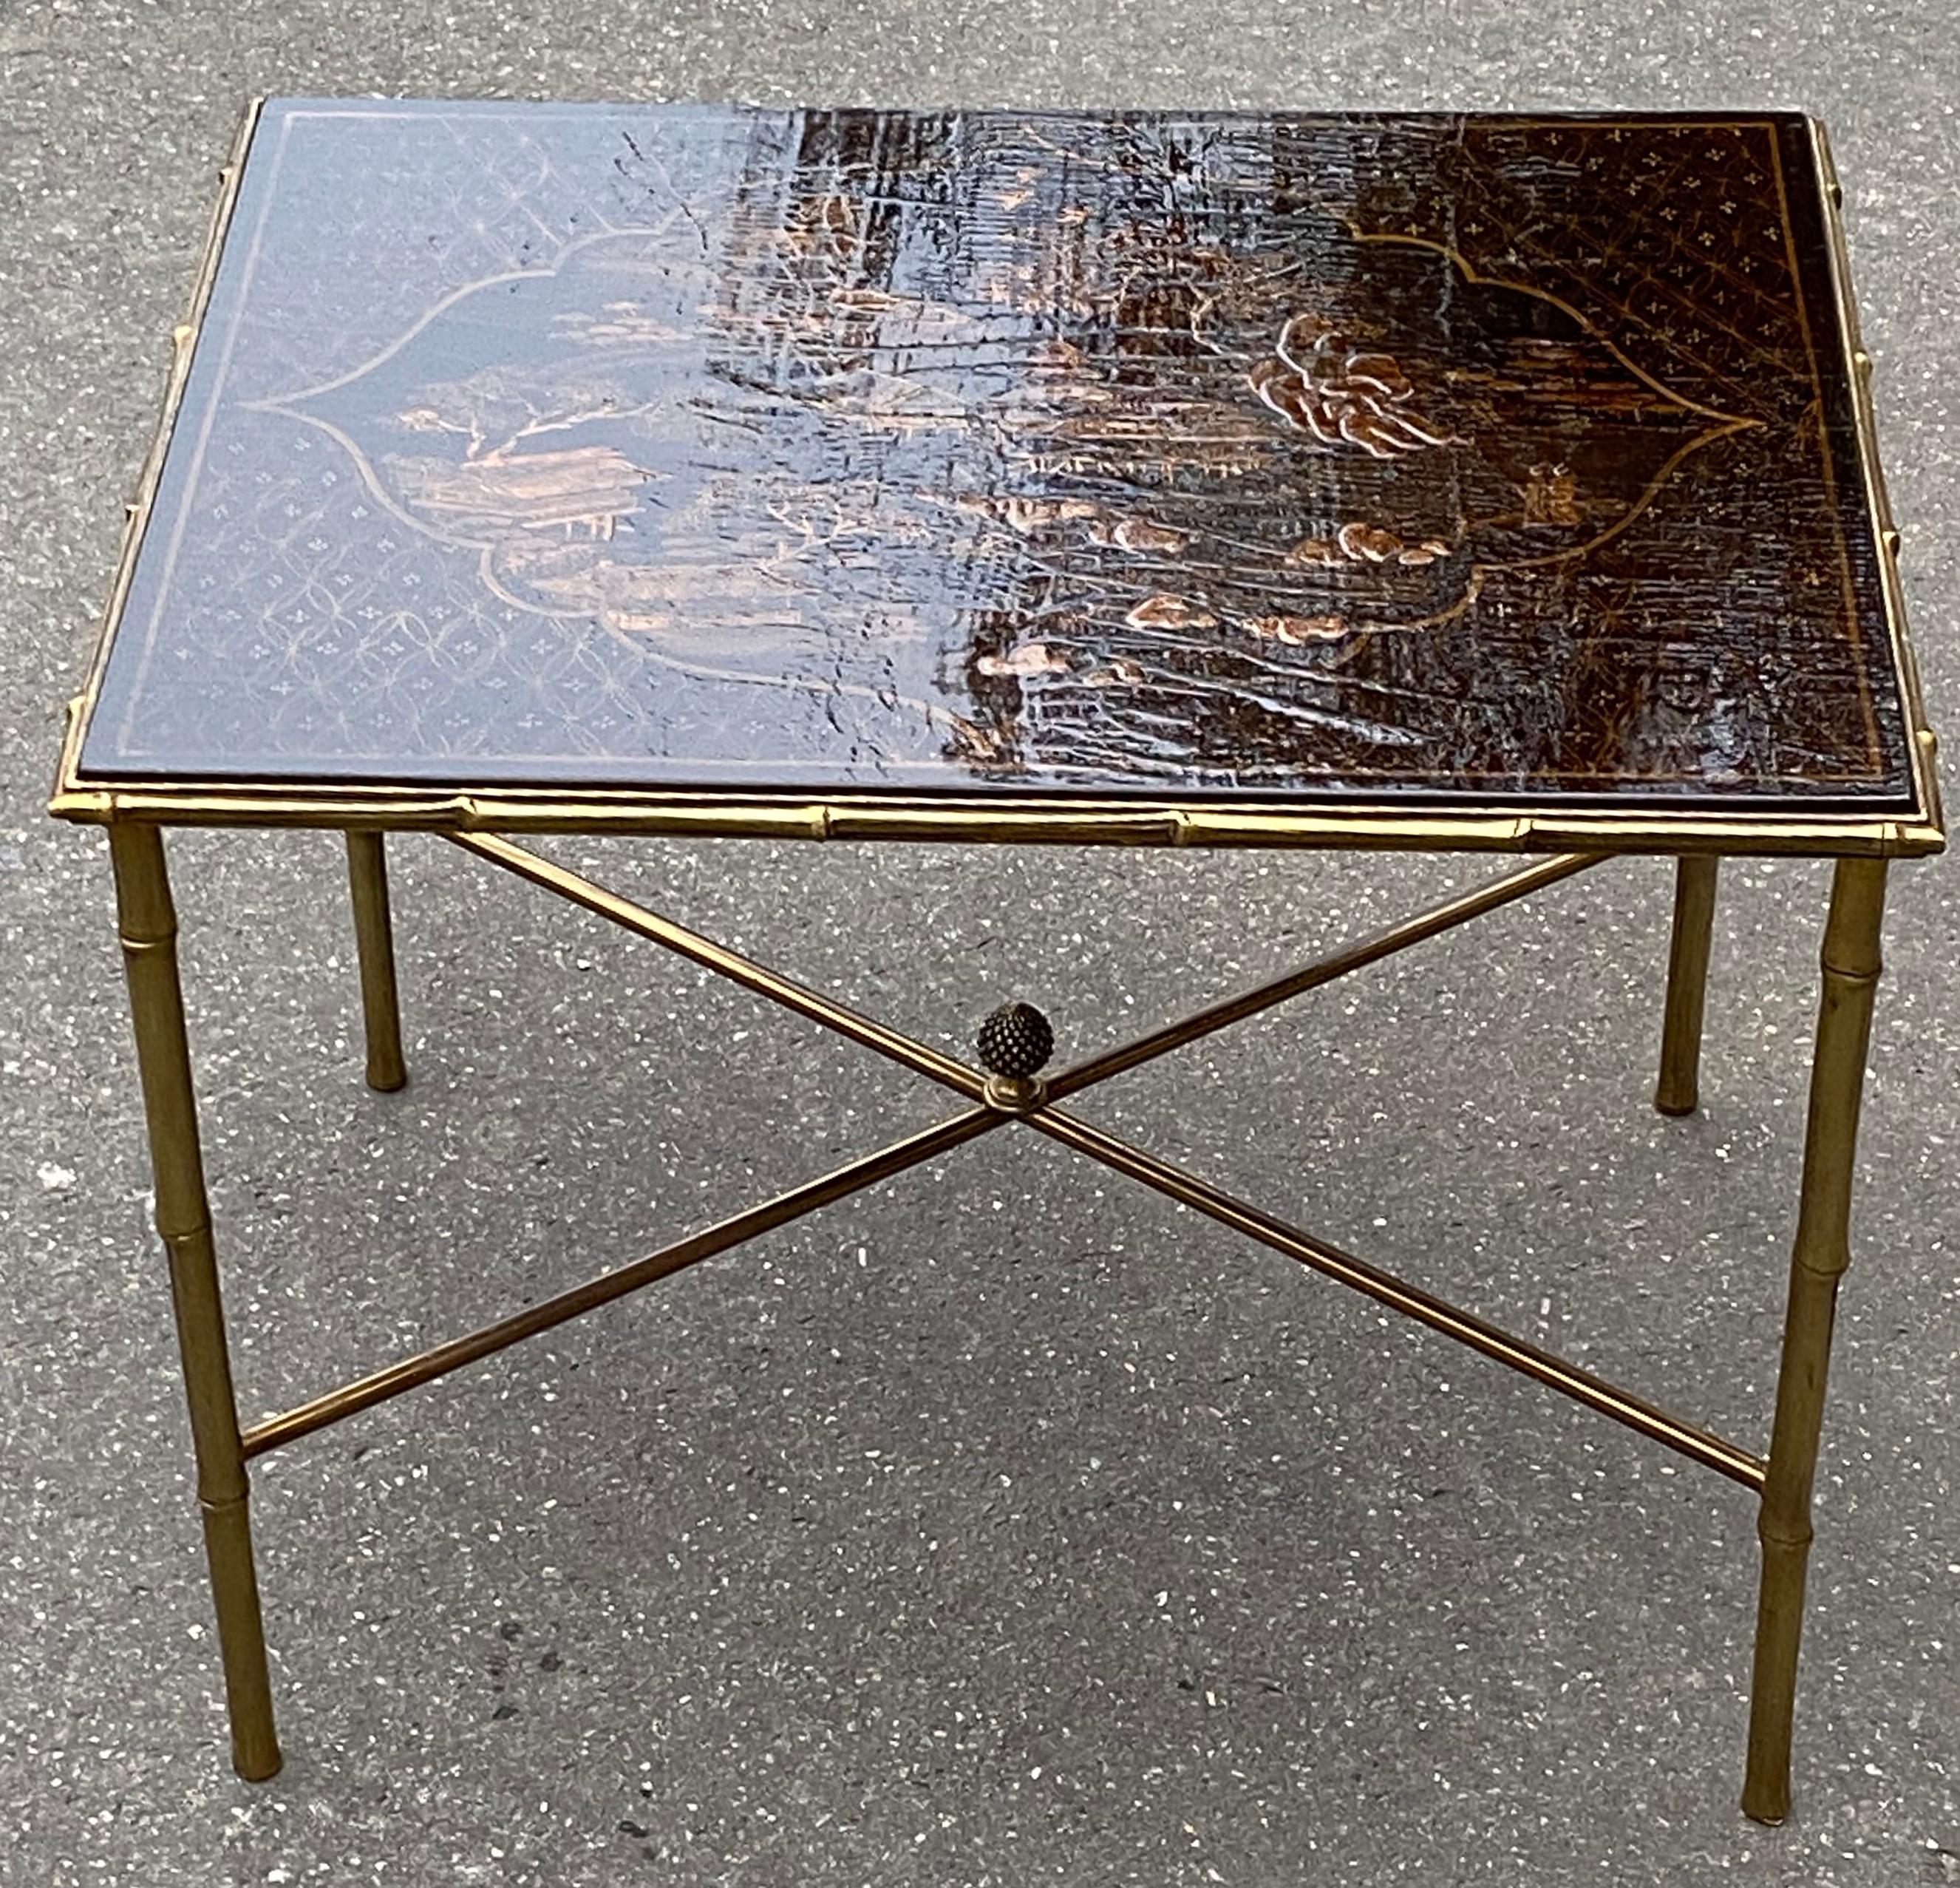 Gilded bronze table with bamboo decor with Chinese lacquer wooden top decorated with landscape, pagodas, birds
Spacer with pine cone
Circa 1950, Good condition made by Maison Bagués ou Jansen
Everything is screwed, removable, easy to send all